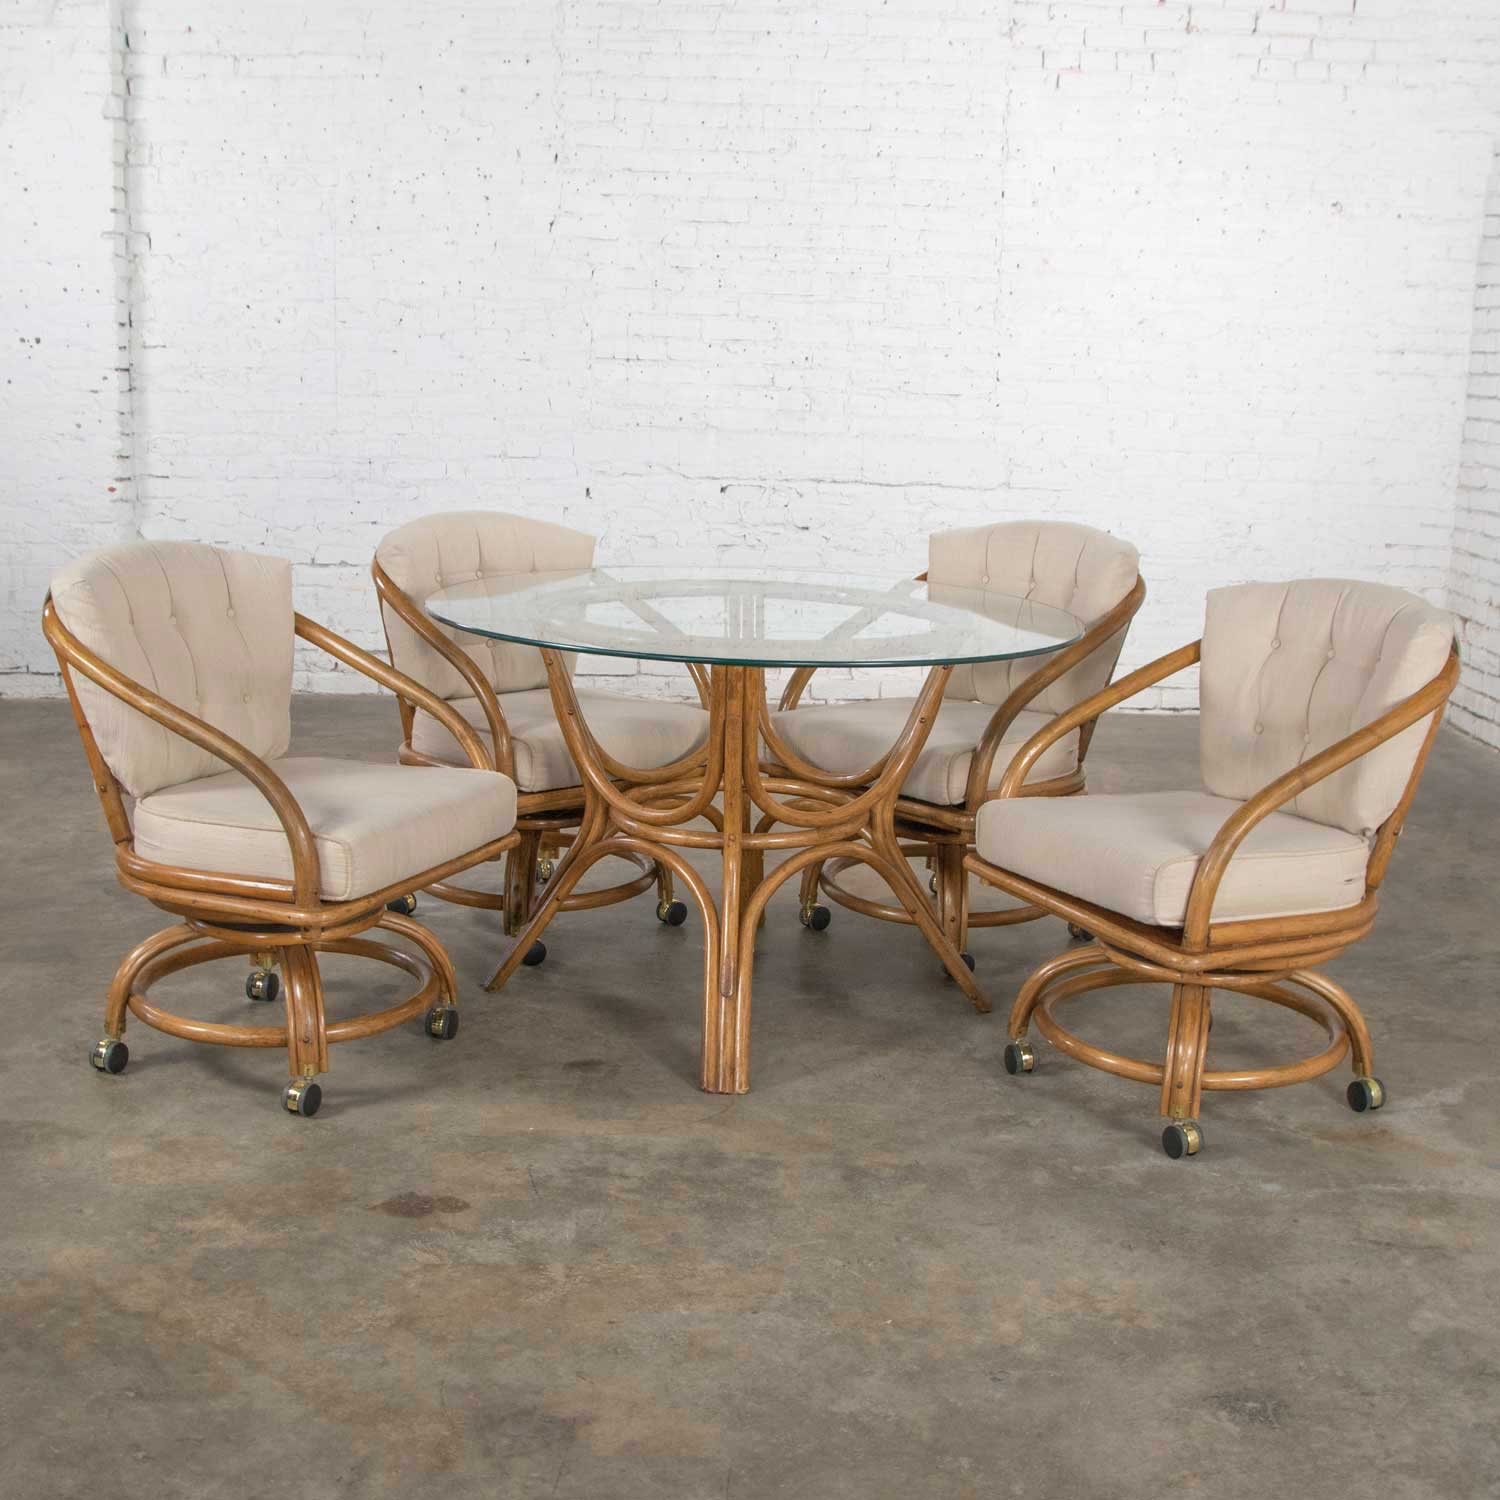 Vintage Rattan Game Table Set Round Glass Top Table & 4 Swivel Rolling Chairs 1970-1980